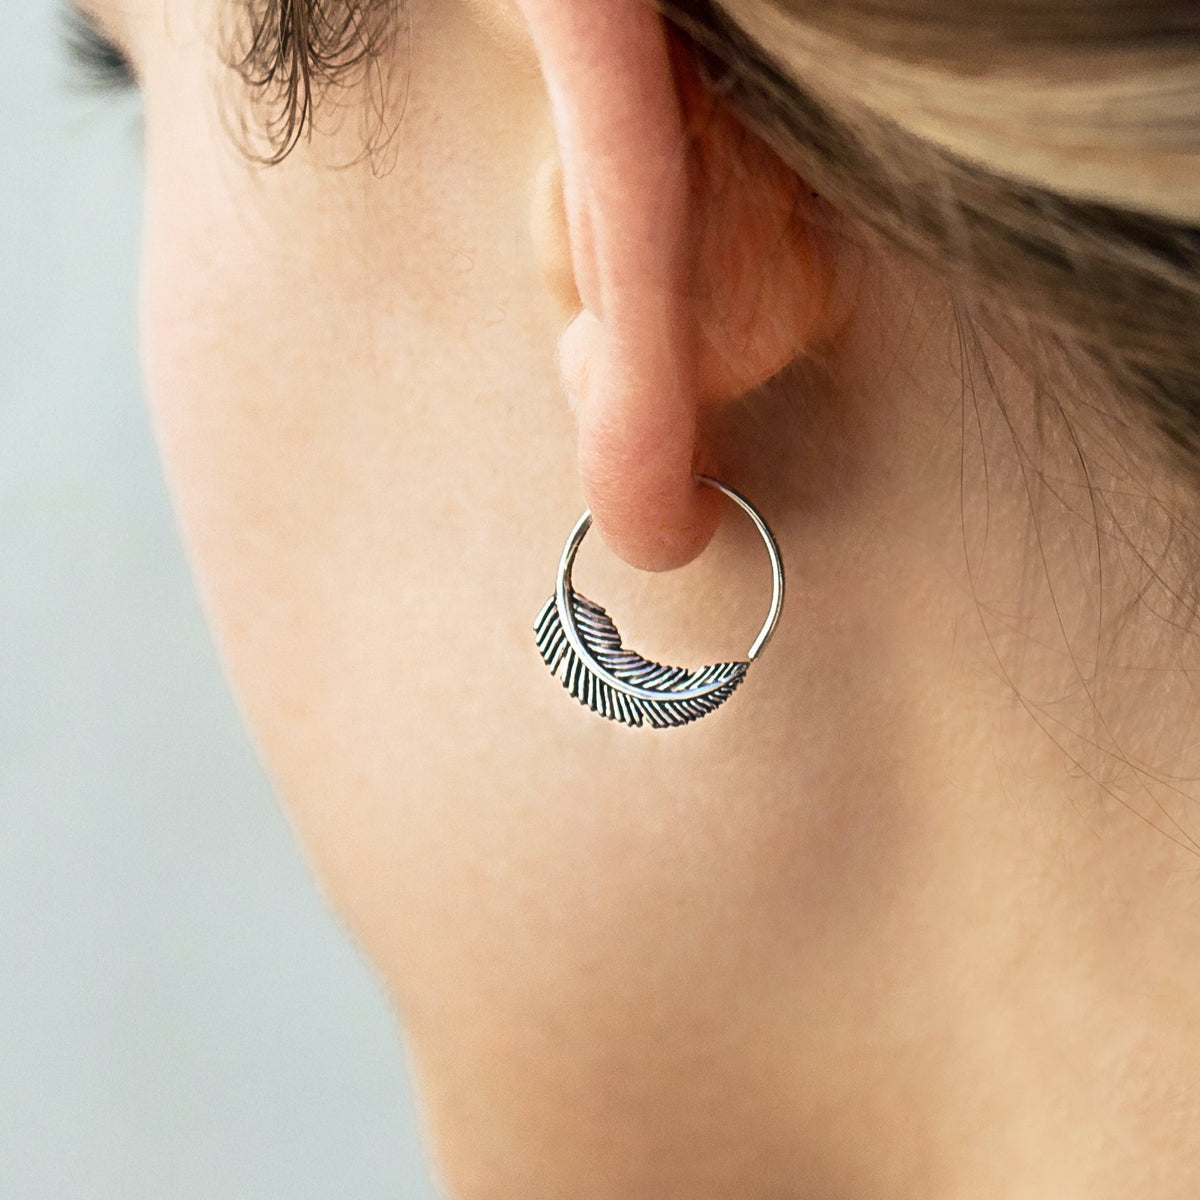 Tiny Silver Feather Hoop Earrings 14mm - Nature Jewelry - cartilage, tragus, helix daith, piercing (264S)